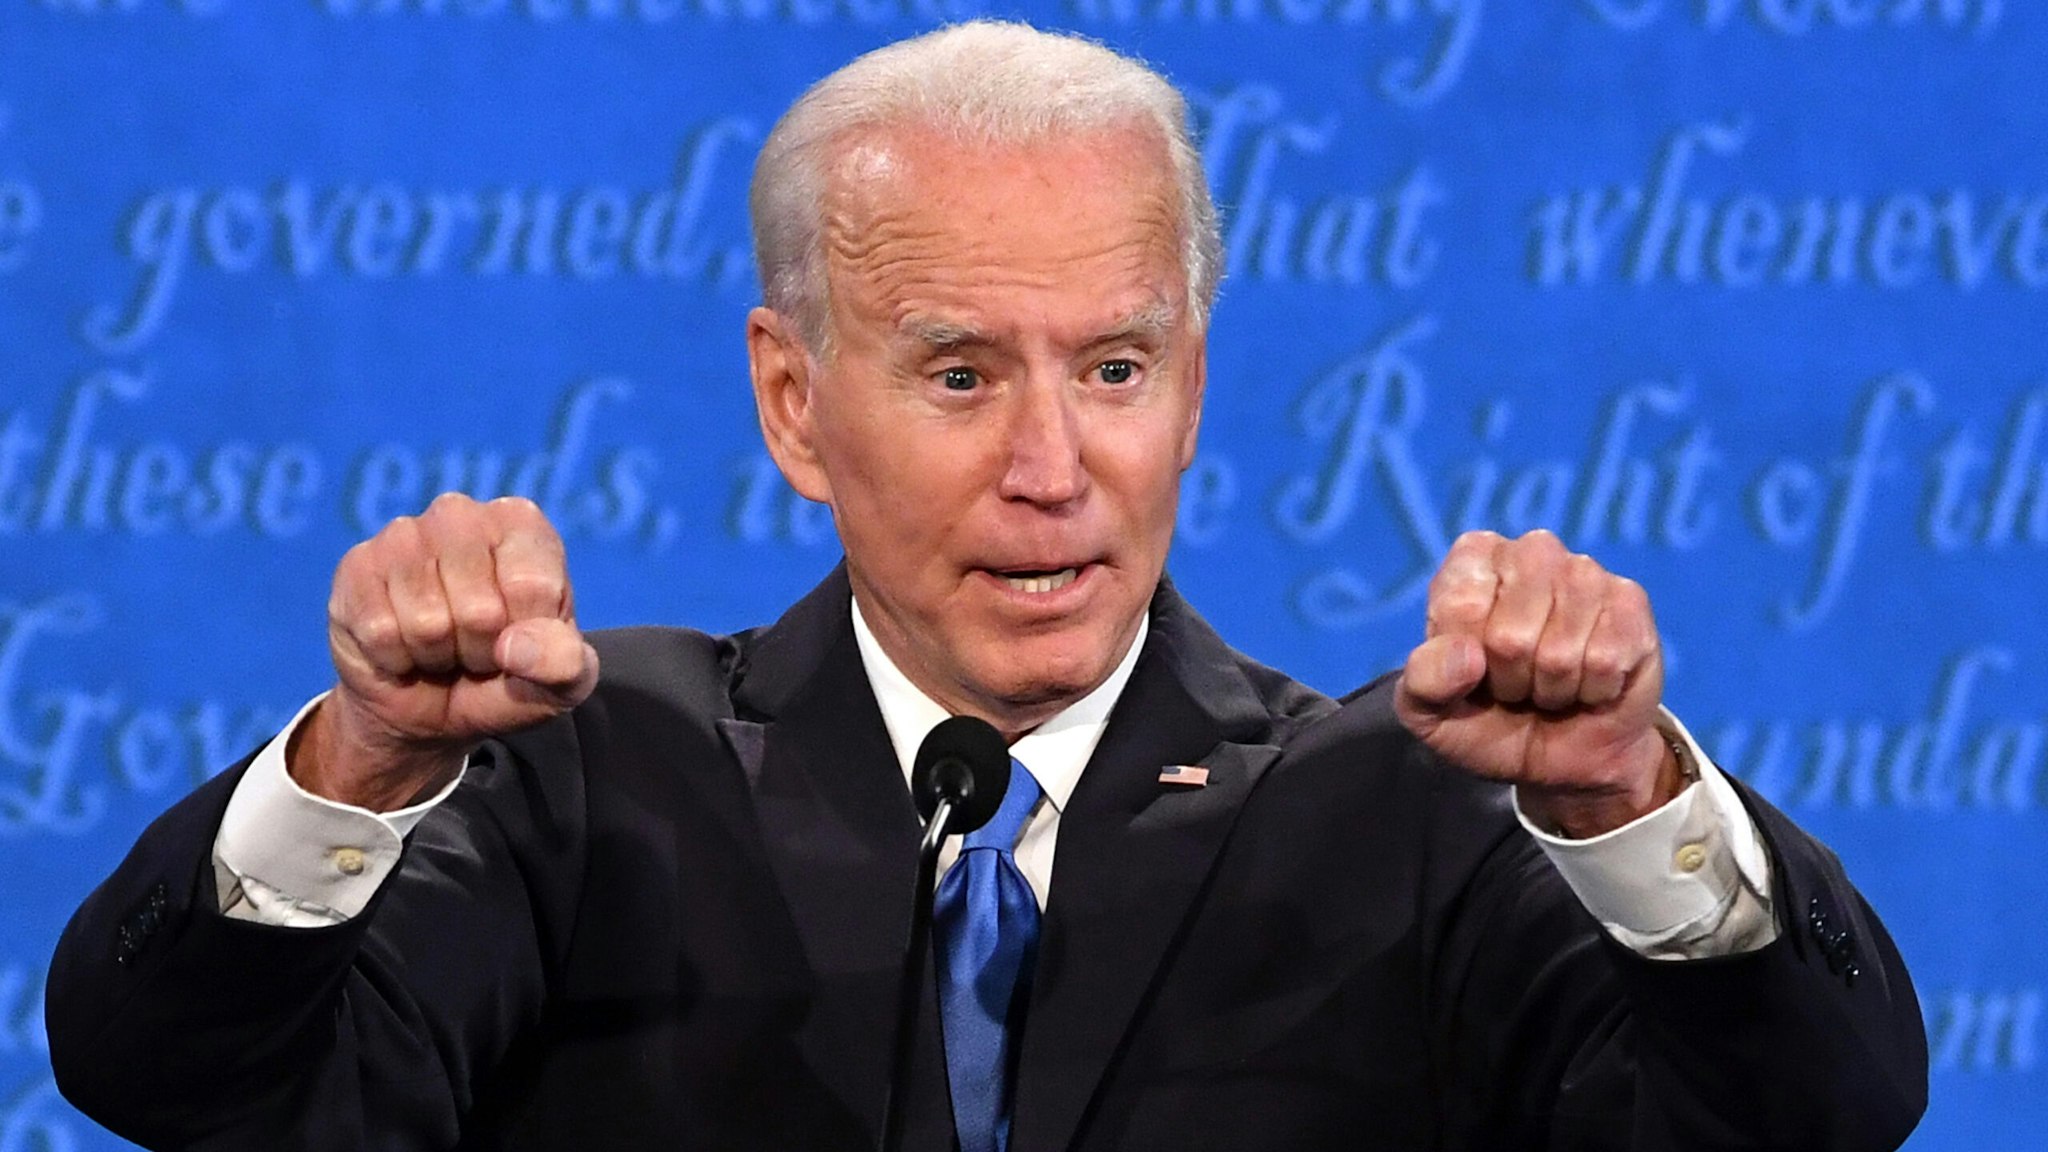 Joe Biden, 2020 Democratic presidential nominee, speaks during the U.S. presidential debate at Belmont University in Nashville, Tennessee, U.S., on Thursday, Oct. 22, 2020. Trump and Biden will square off for 90 minutes in their final debate, but the biggest risk for each candidate comes more from their own weaknesses and less from each other.